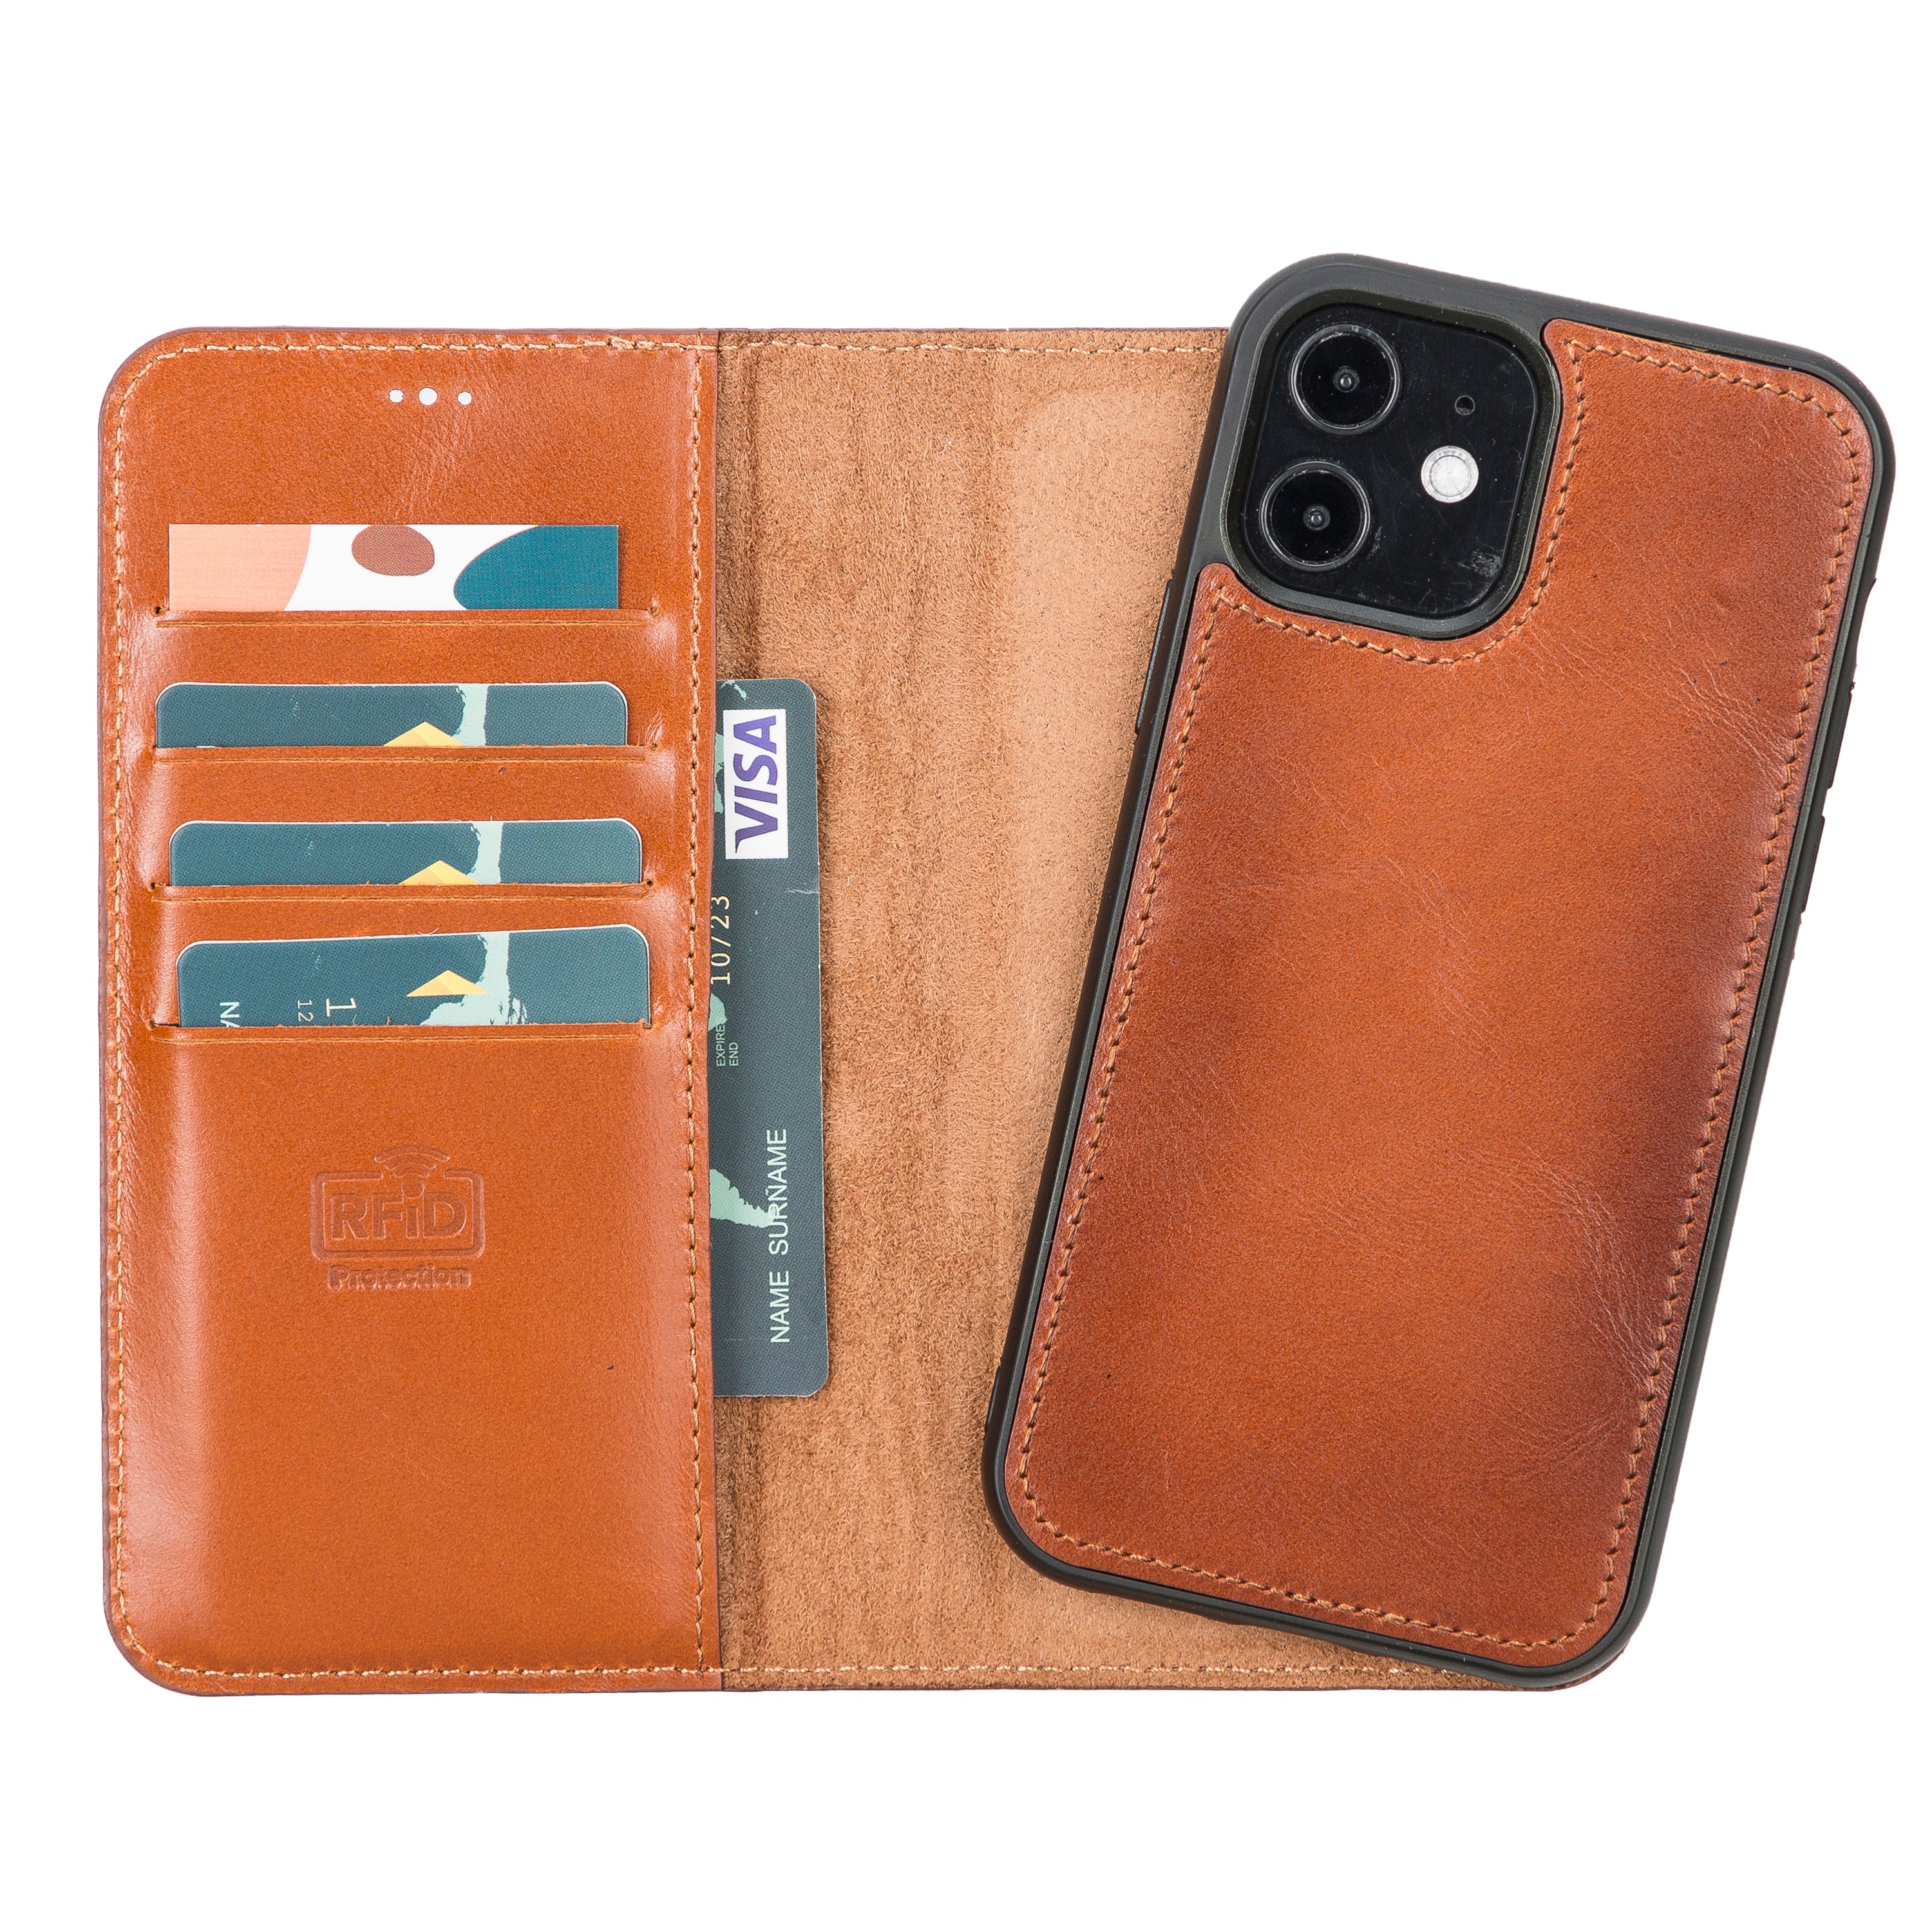 DelfiCase Magnetic Detachable Leather Wallet Case for iPhone 12 and iPhone 12 Pro (6.1") 1